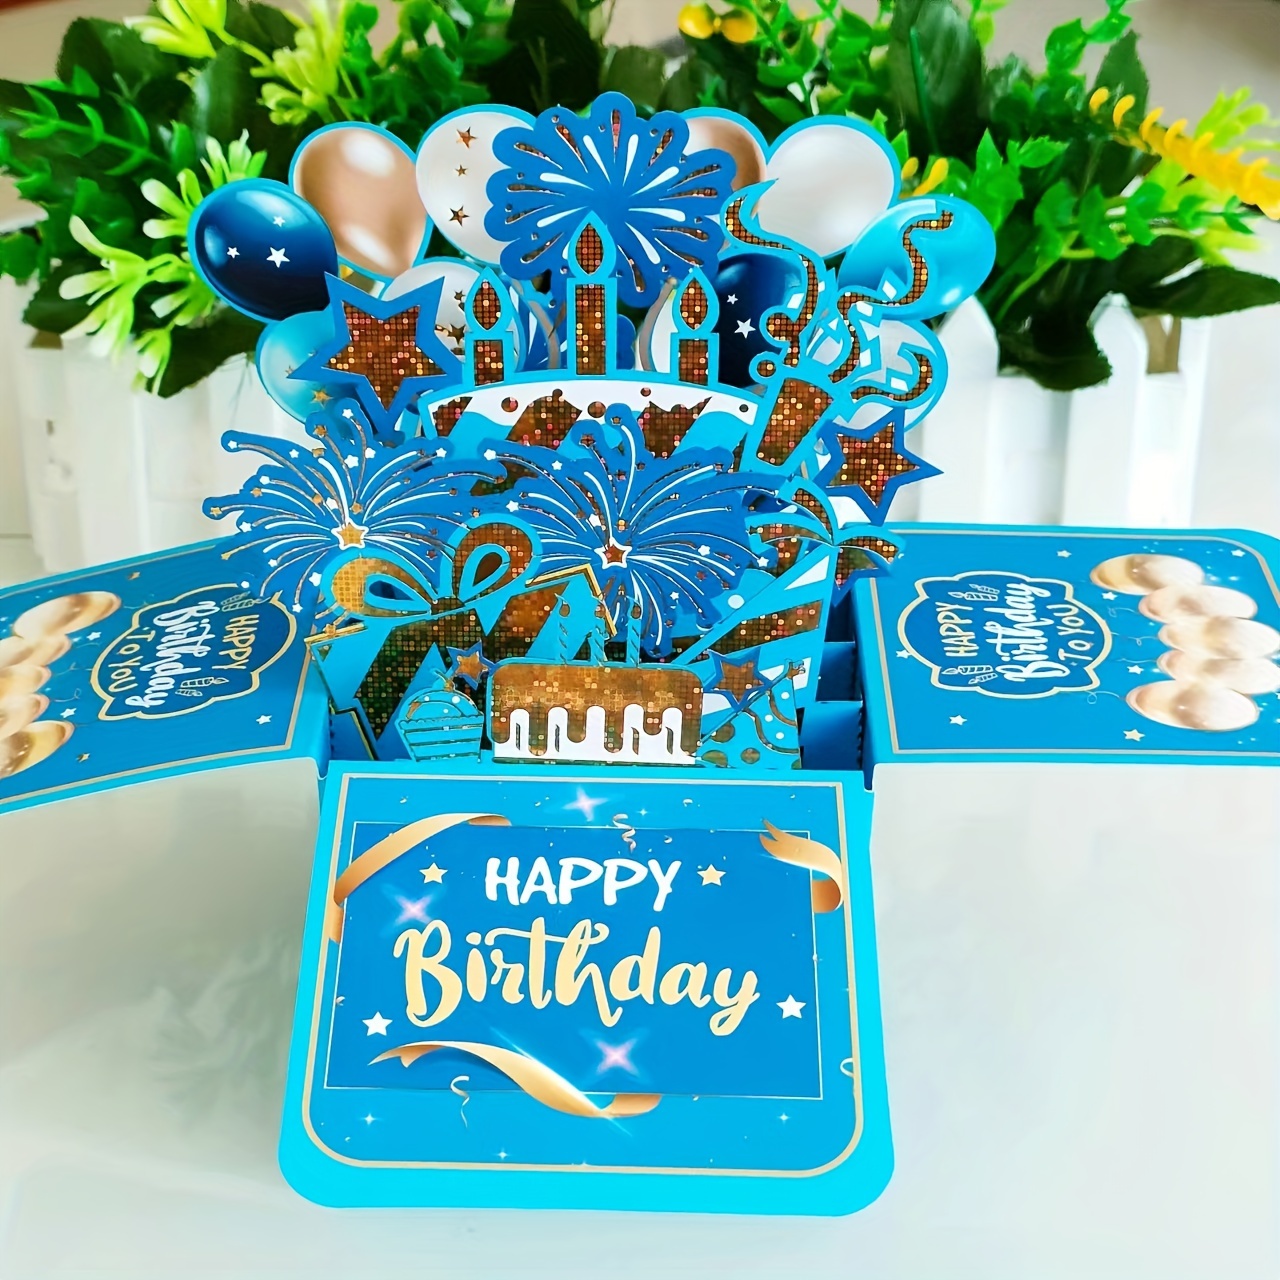 

3d Pop-up Birthday Greeting Card Box With Blue Hot Stamping - Handwritten Paper Carving Design For Any Recipient - Unique Festive Creative Holiday Gift Idea